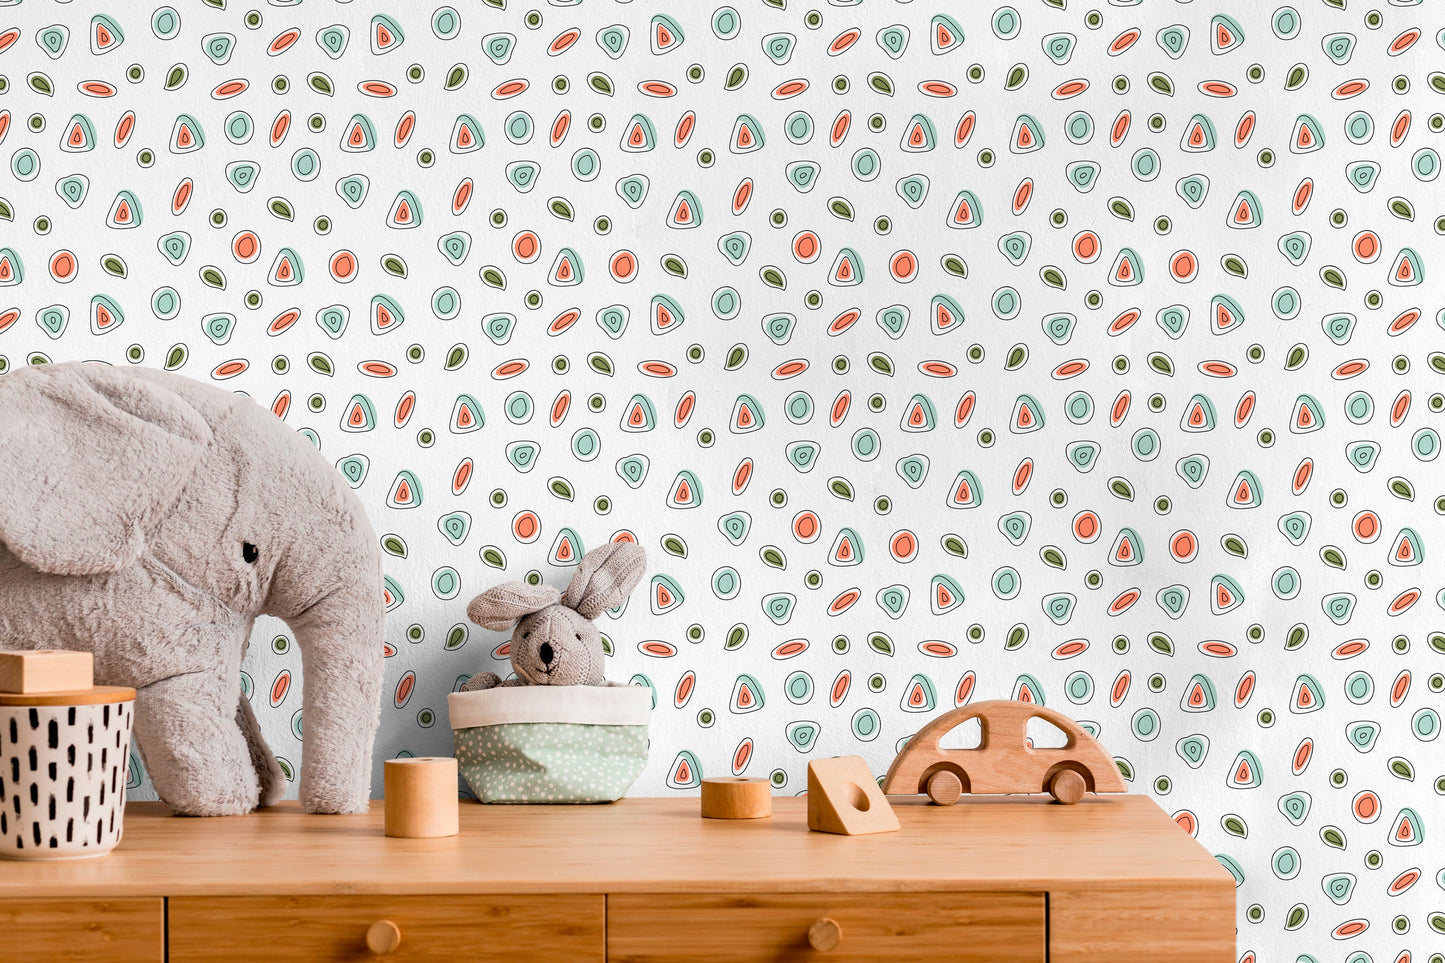 Playful Abstract Pebbles Wallpaper - C031